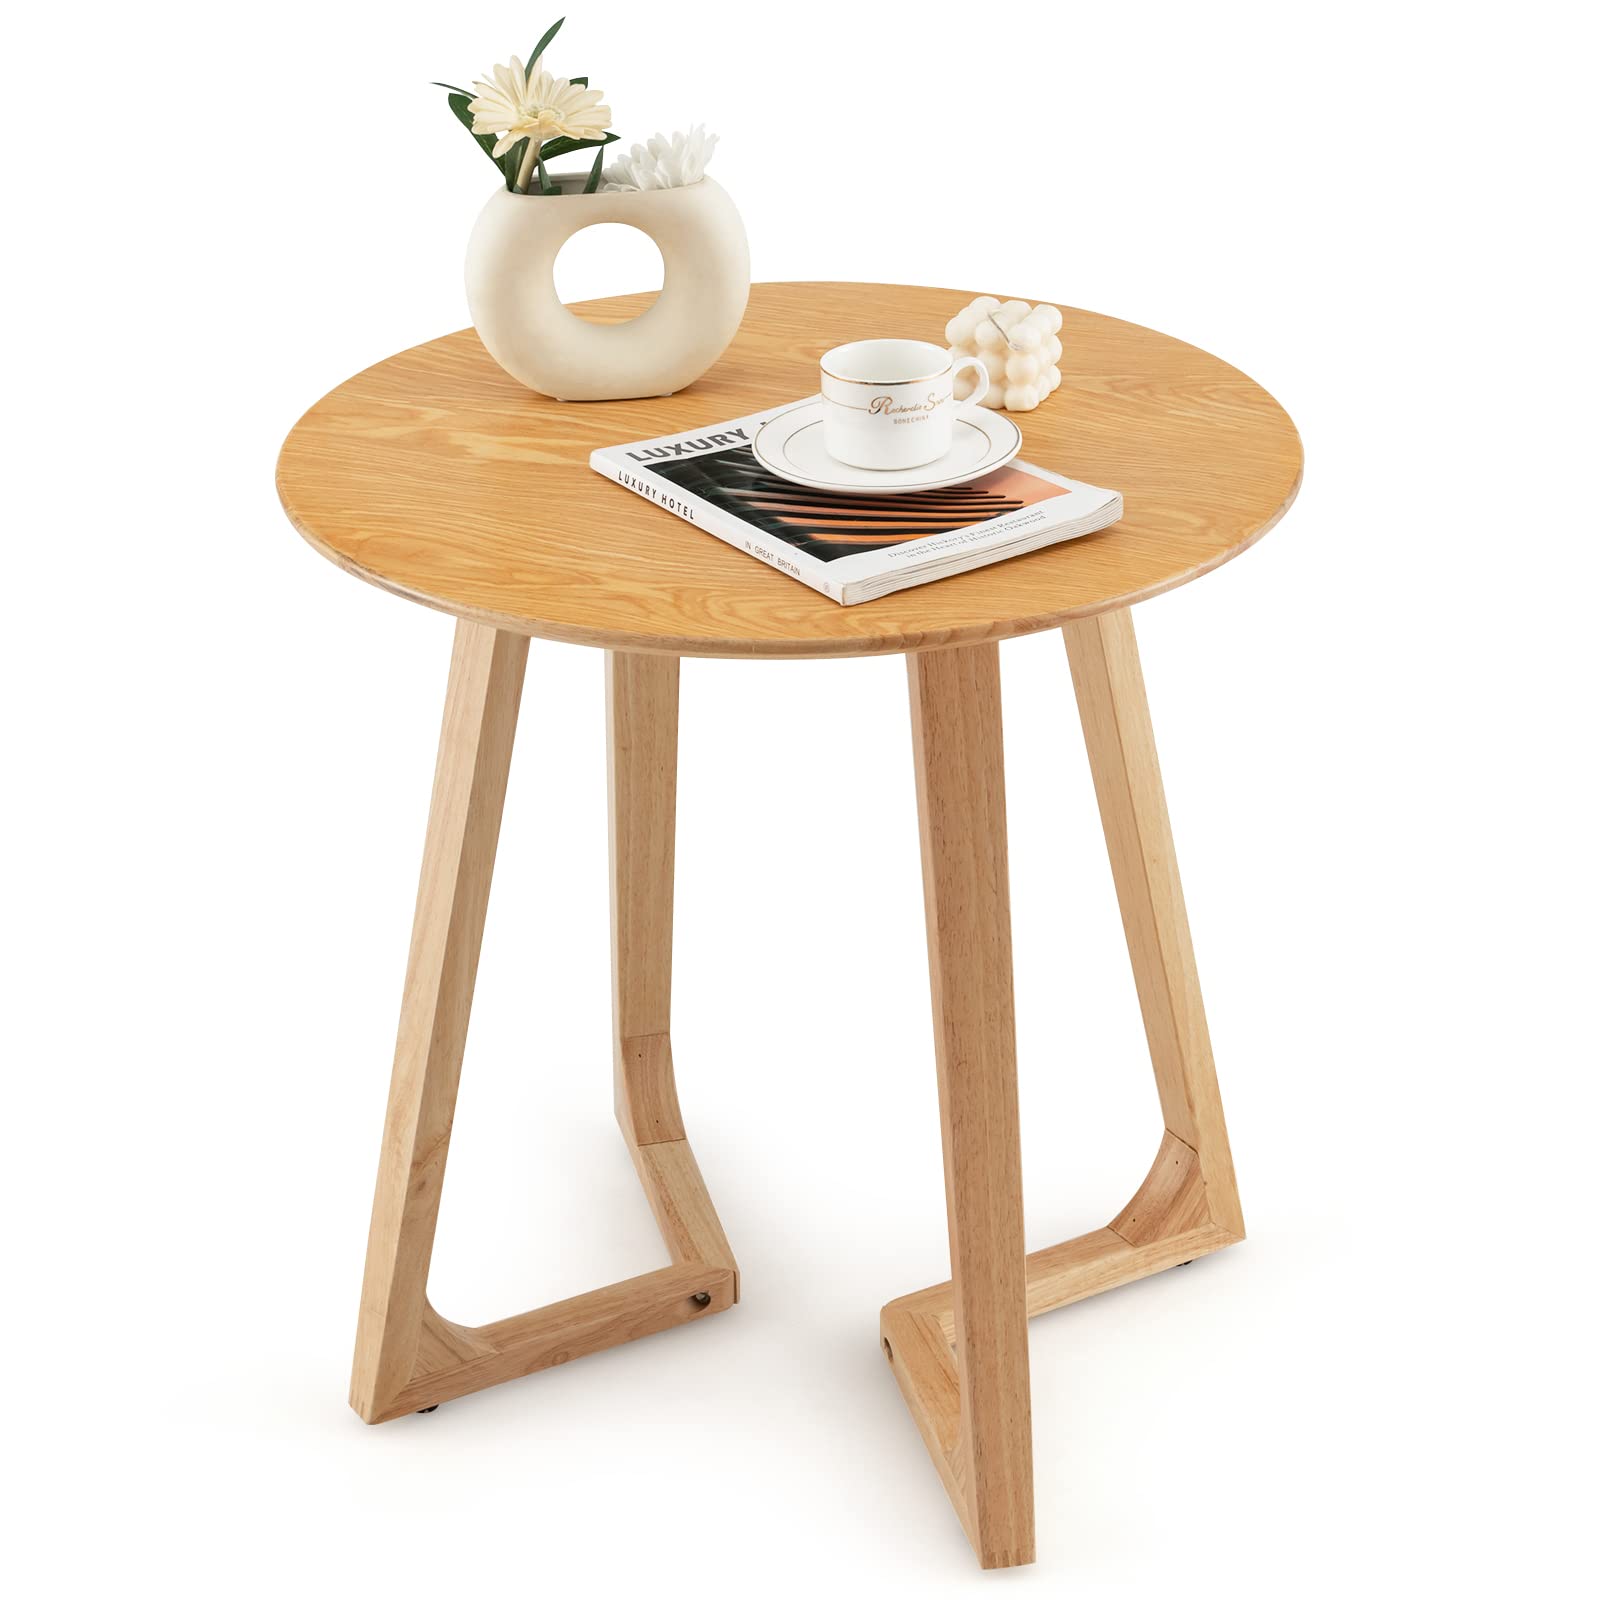 Giantex 24" Round End Table - Rubber Wood Sofa Side Table with Adjustable Foot Pads, Natural